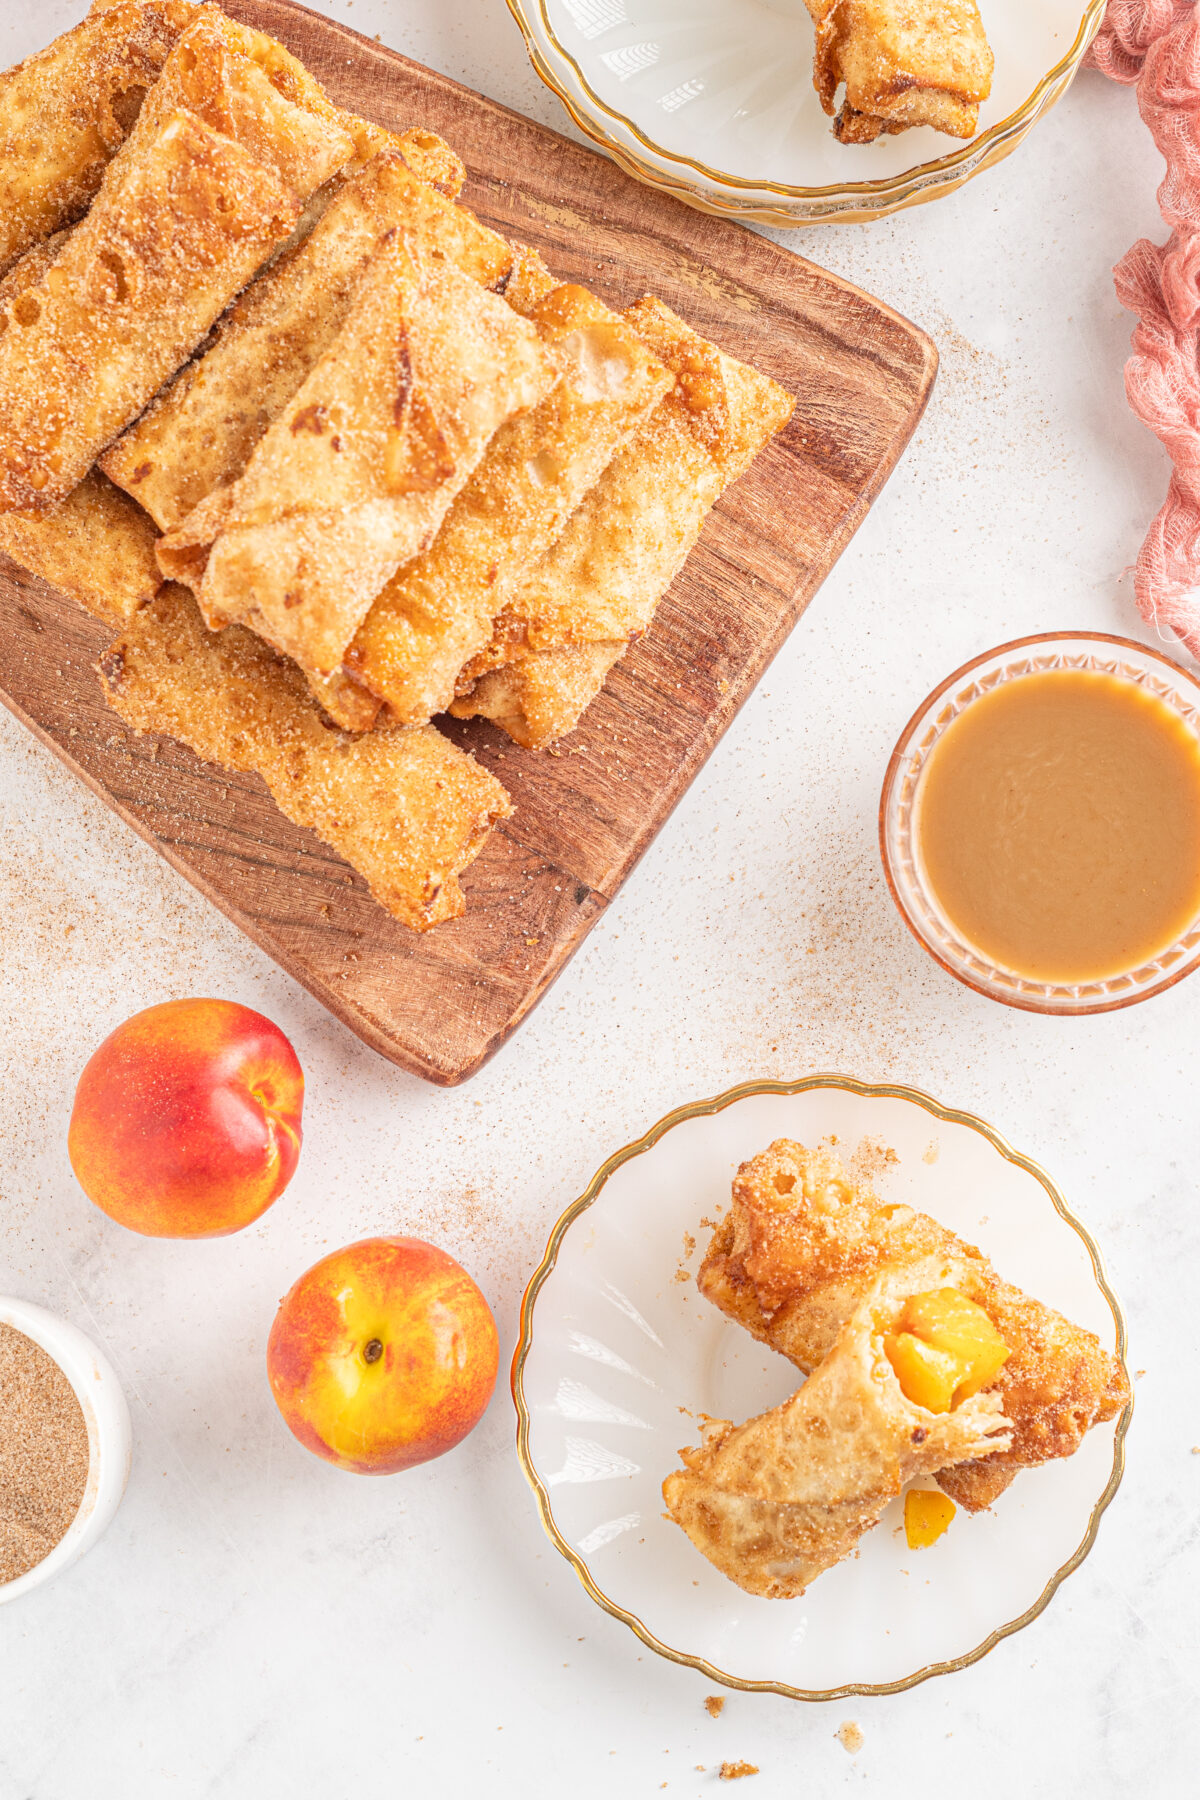 These Peach Cobbler egg rolls combine the sweet taste of peaches, with cinnamon and sugar, all wrapped up in crispy egg roll wrappers.